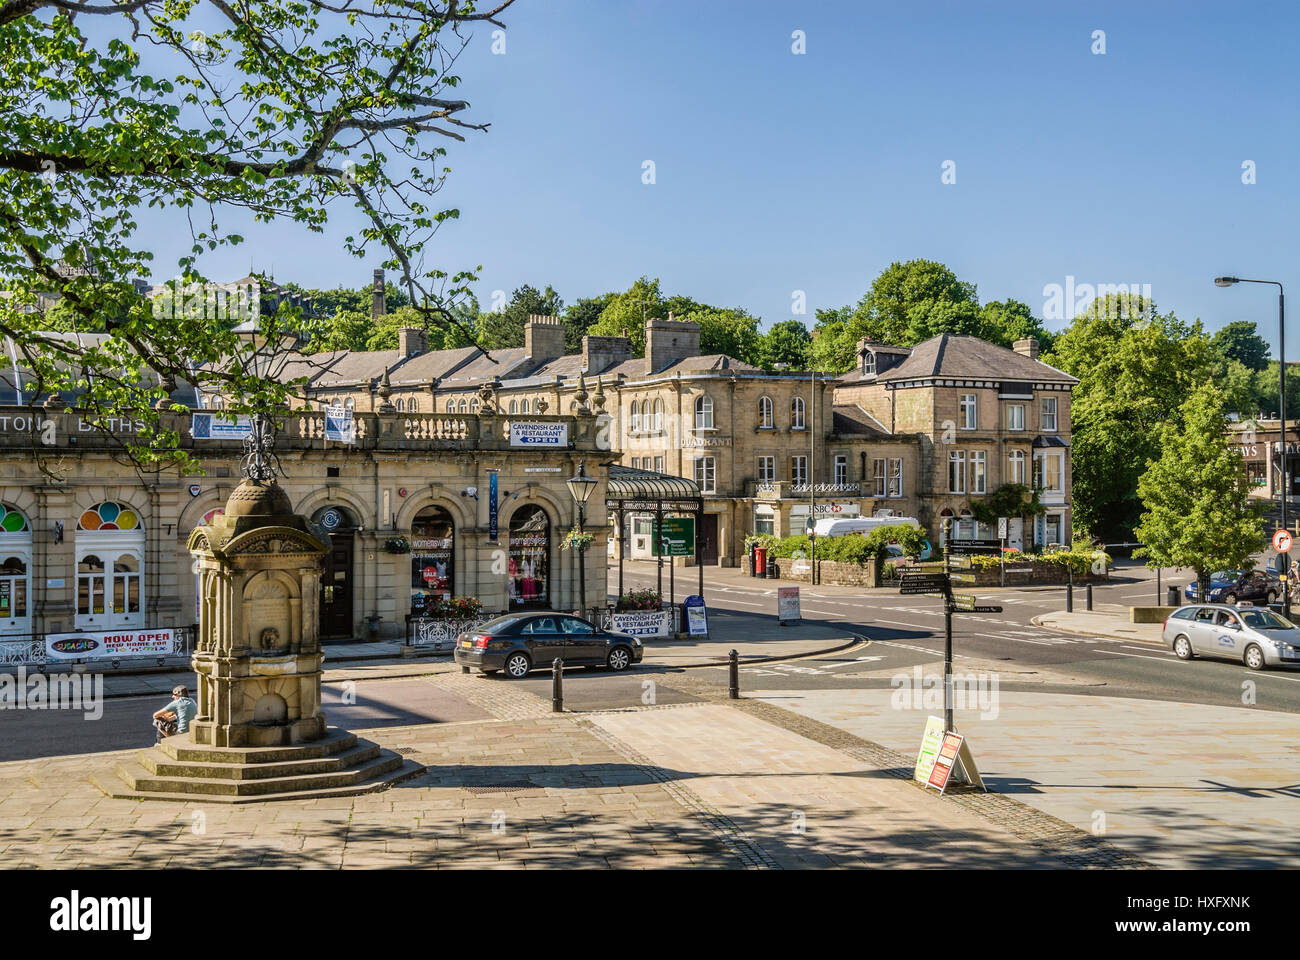 Buxton, a spa town in Derbyshire; England. Buxton is also described as the gateway to the Peak District National Park. Stock Photo